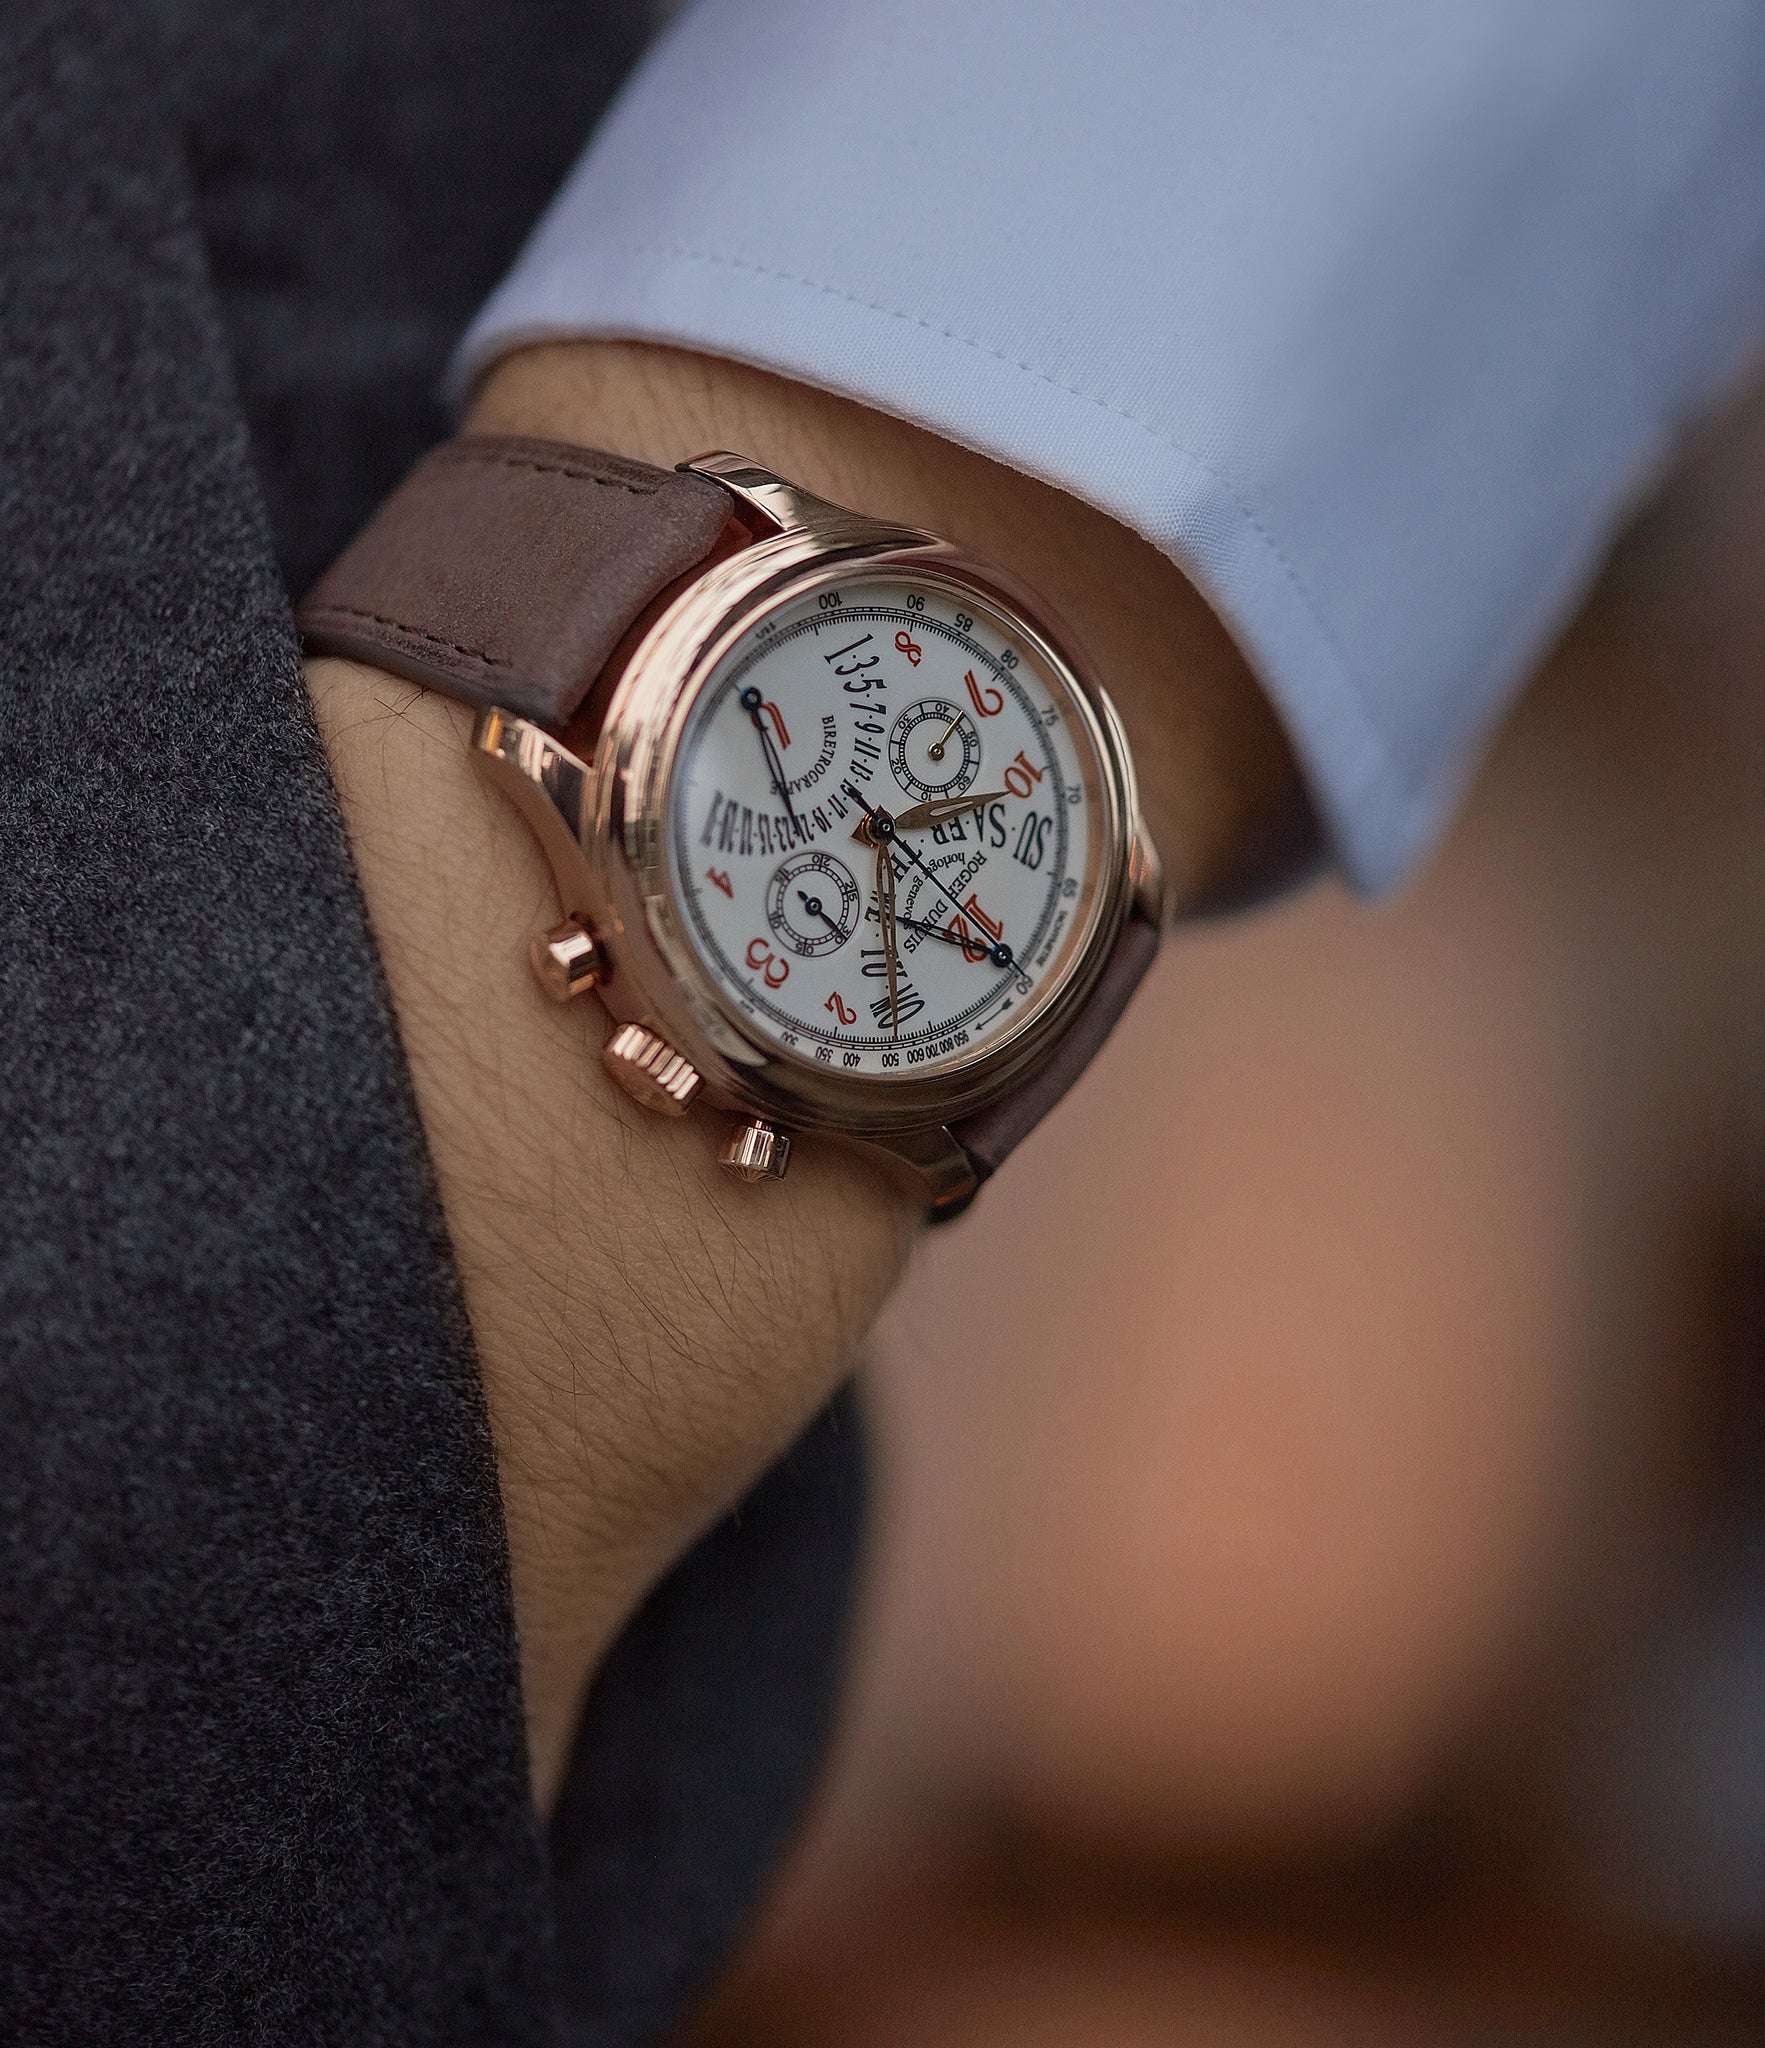 on the wrist Roger Dubuis Hommage bi-retrograde Chronograph H40 560 limited edition rare rose gold lacquer dial watch for sale online at A Collected Man London UK specialist of rare watches